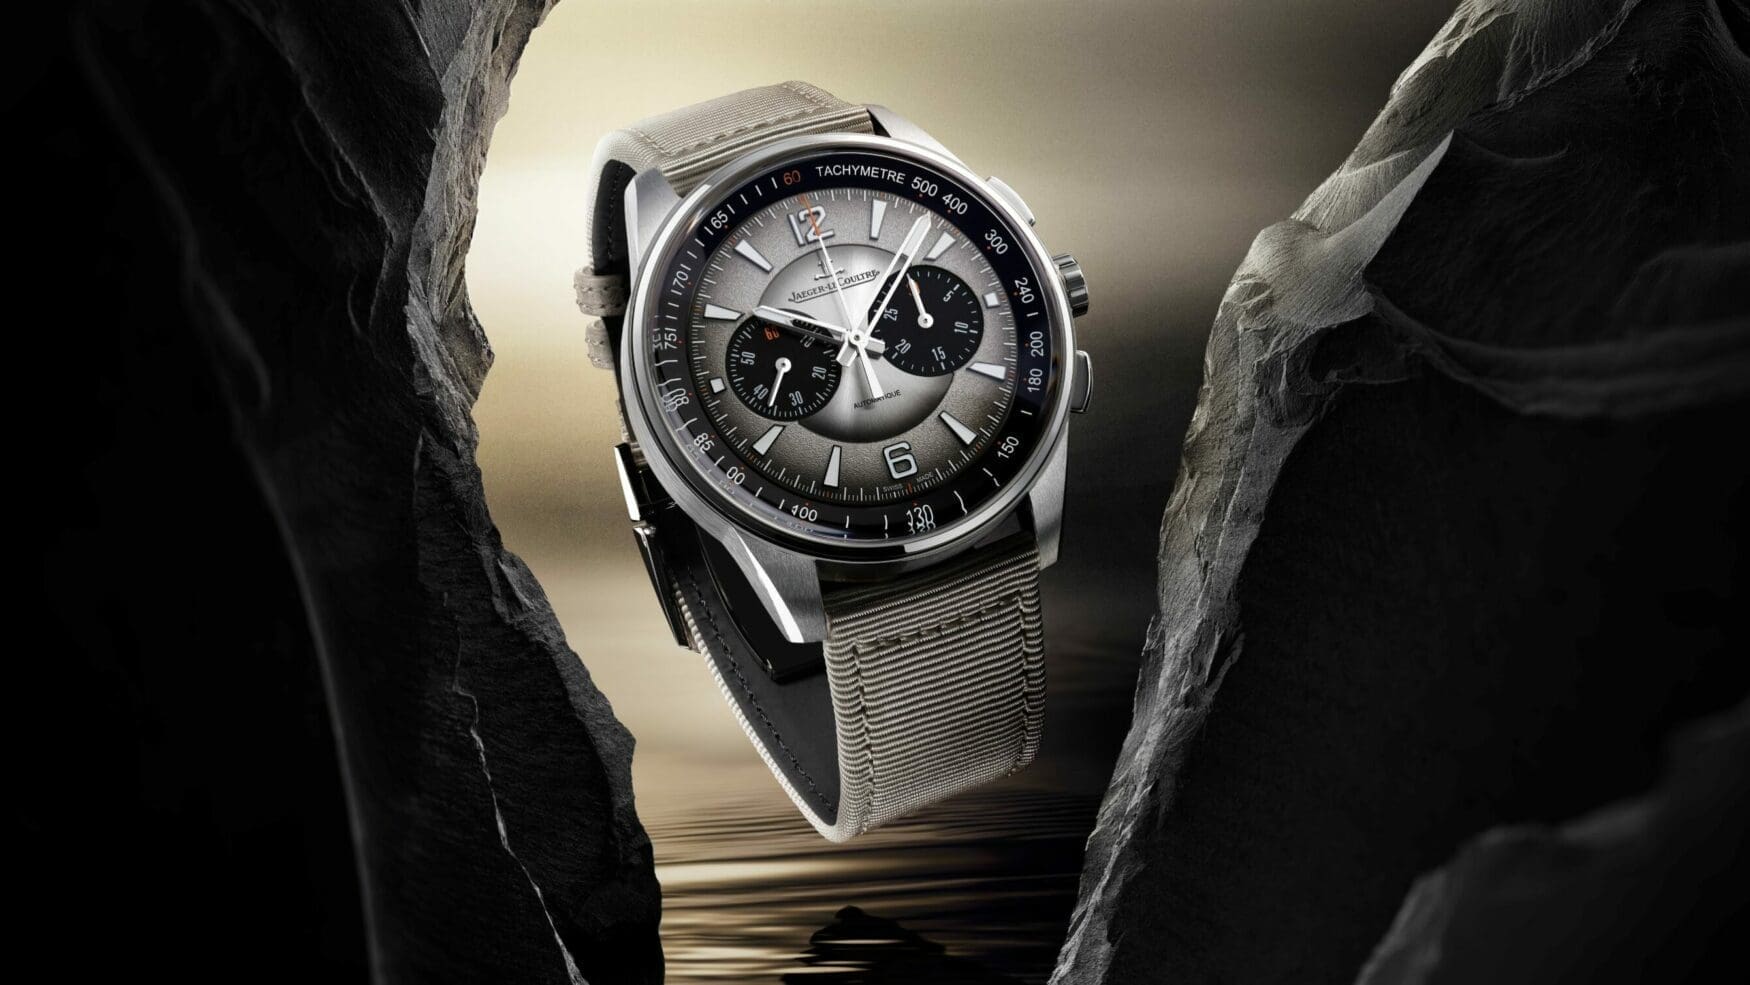 Jaeger-LeCoultre gives the Polaris Chronograph a tasteful lick of lacquer